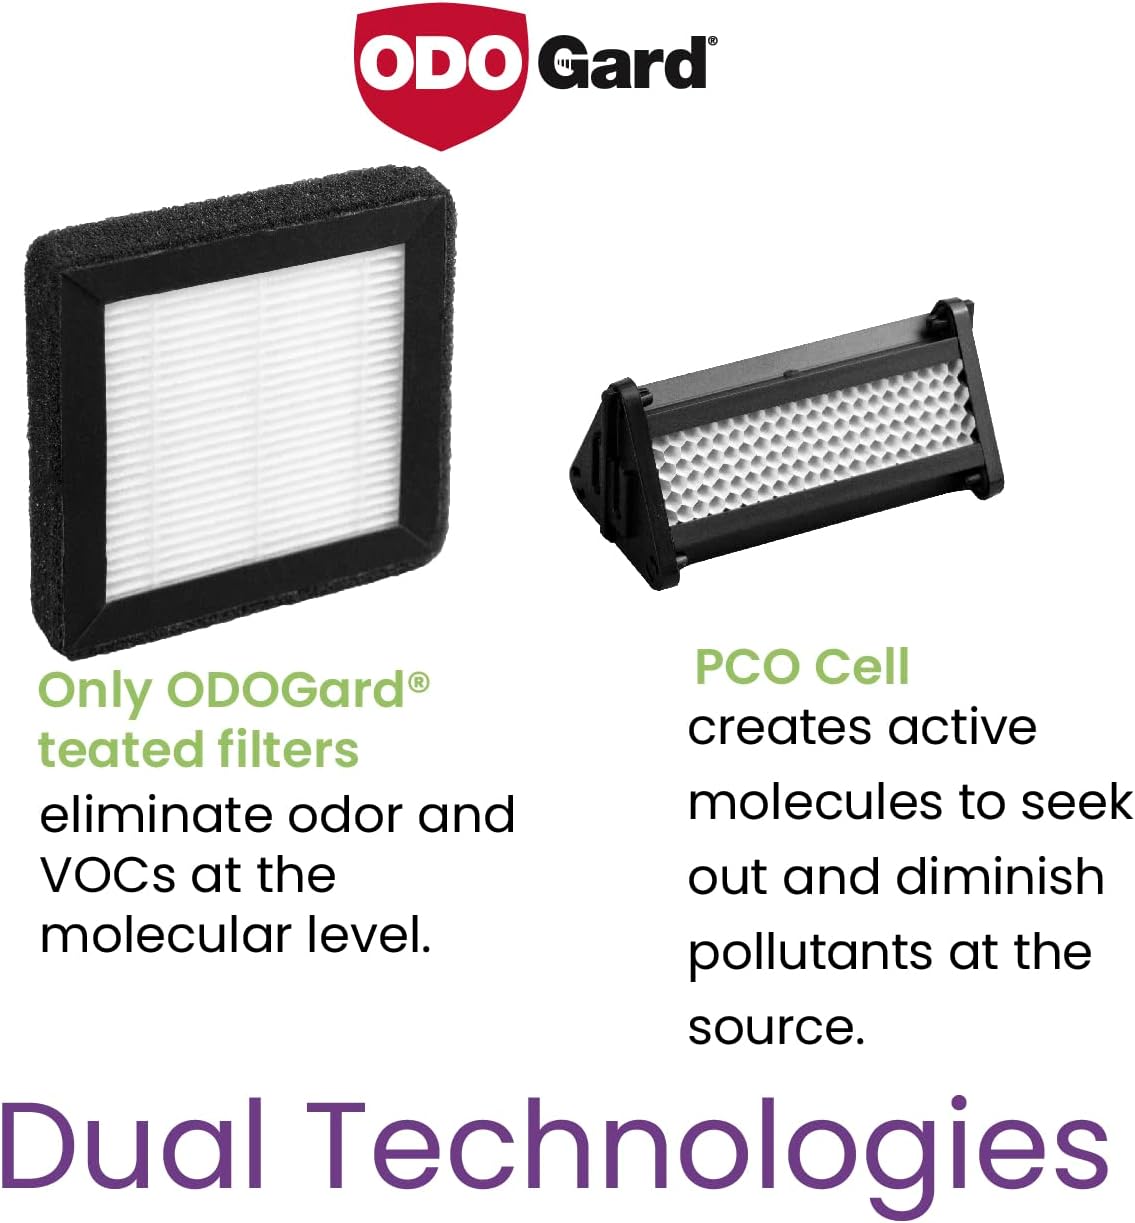 Greentech Environmental Active HEPA+ CAR with ODOGard - Car Air Purifier and Odor Eliminator with HEPA Air Filter - Easy Set Up for Cars, Trucks, Vans and Rideshare Vehicles